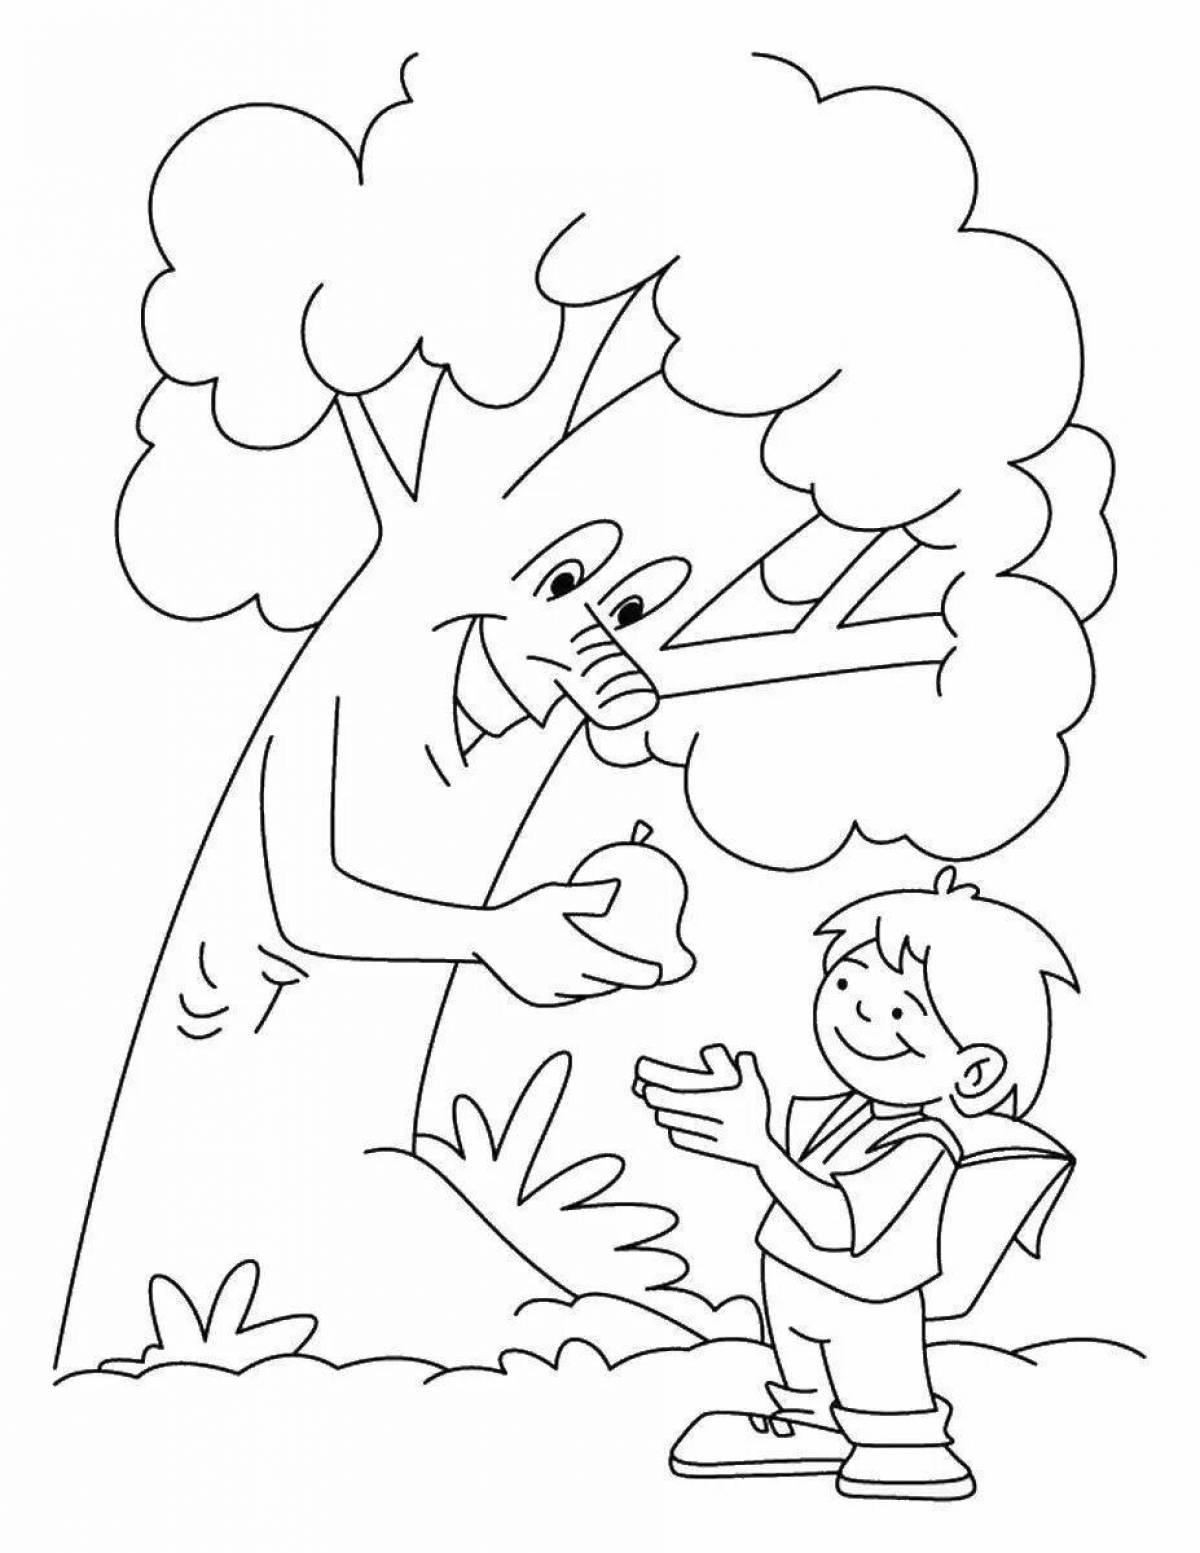 Playful take care of nature coloring page for kids